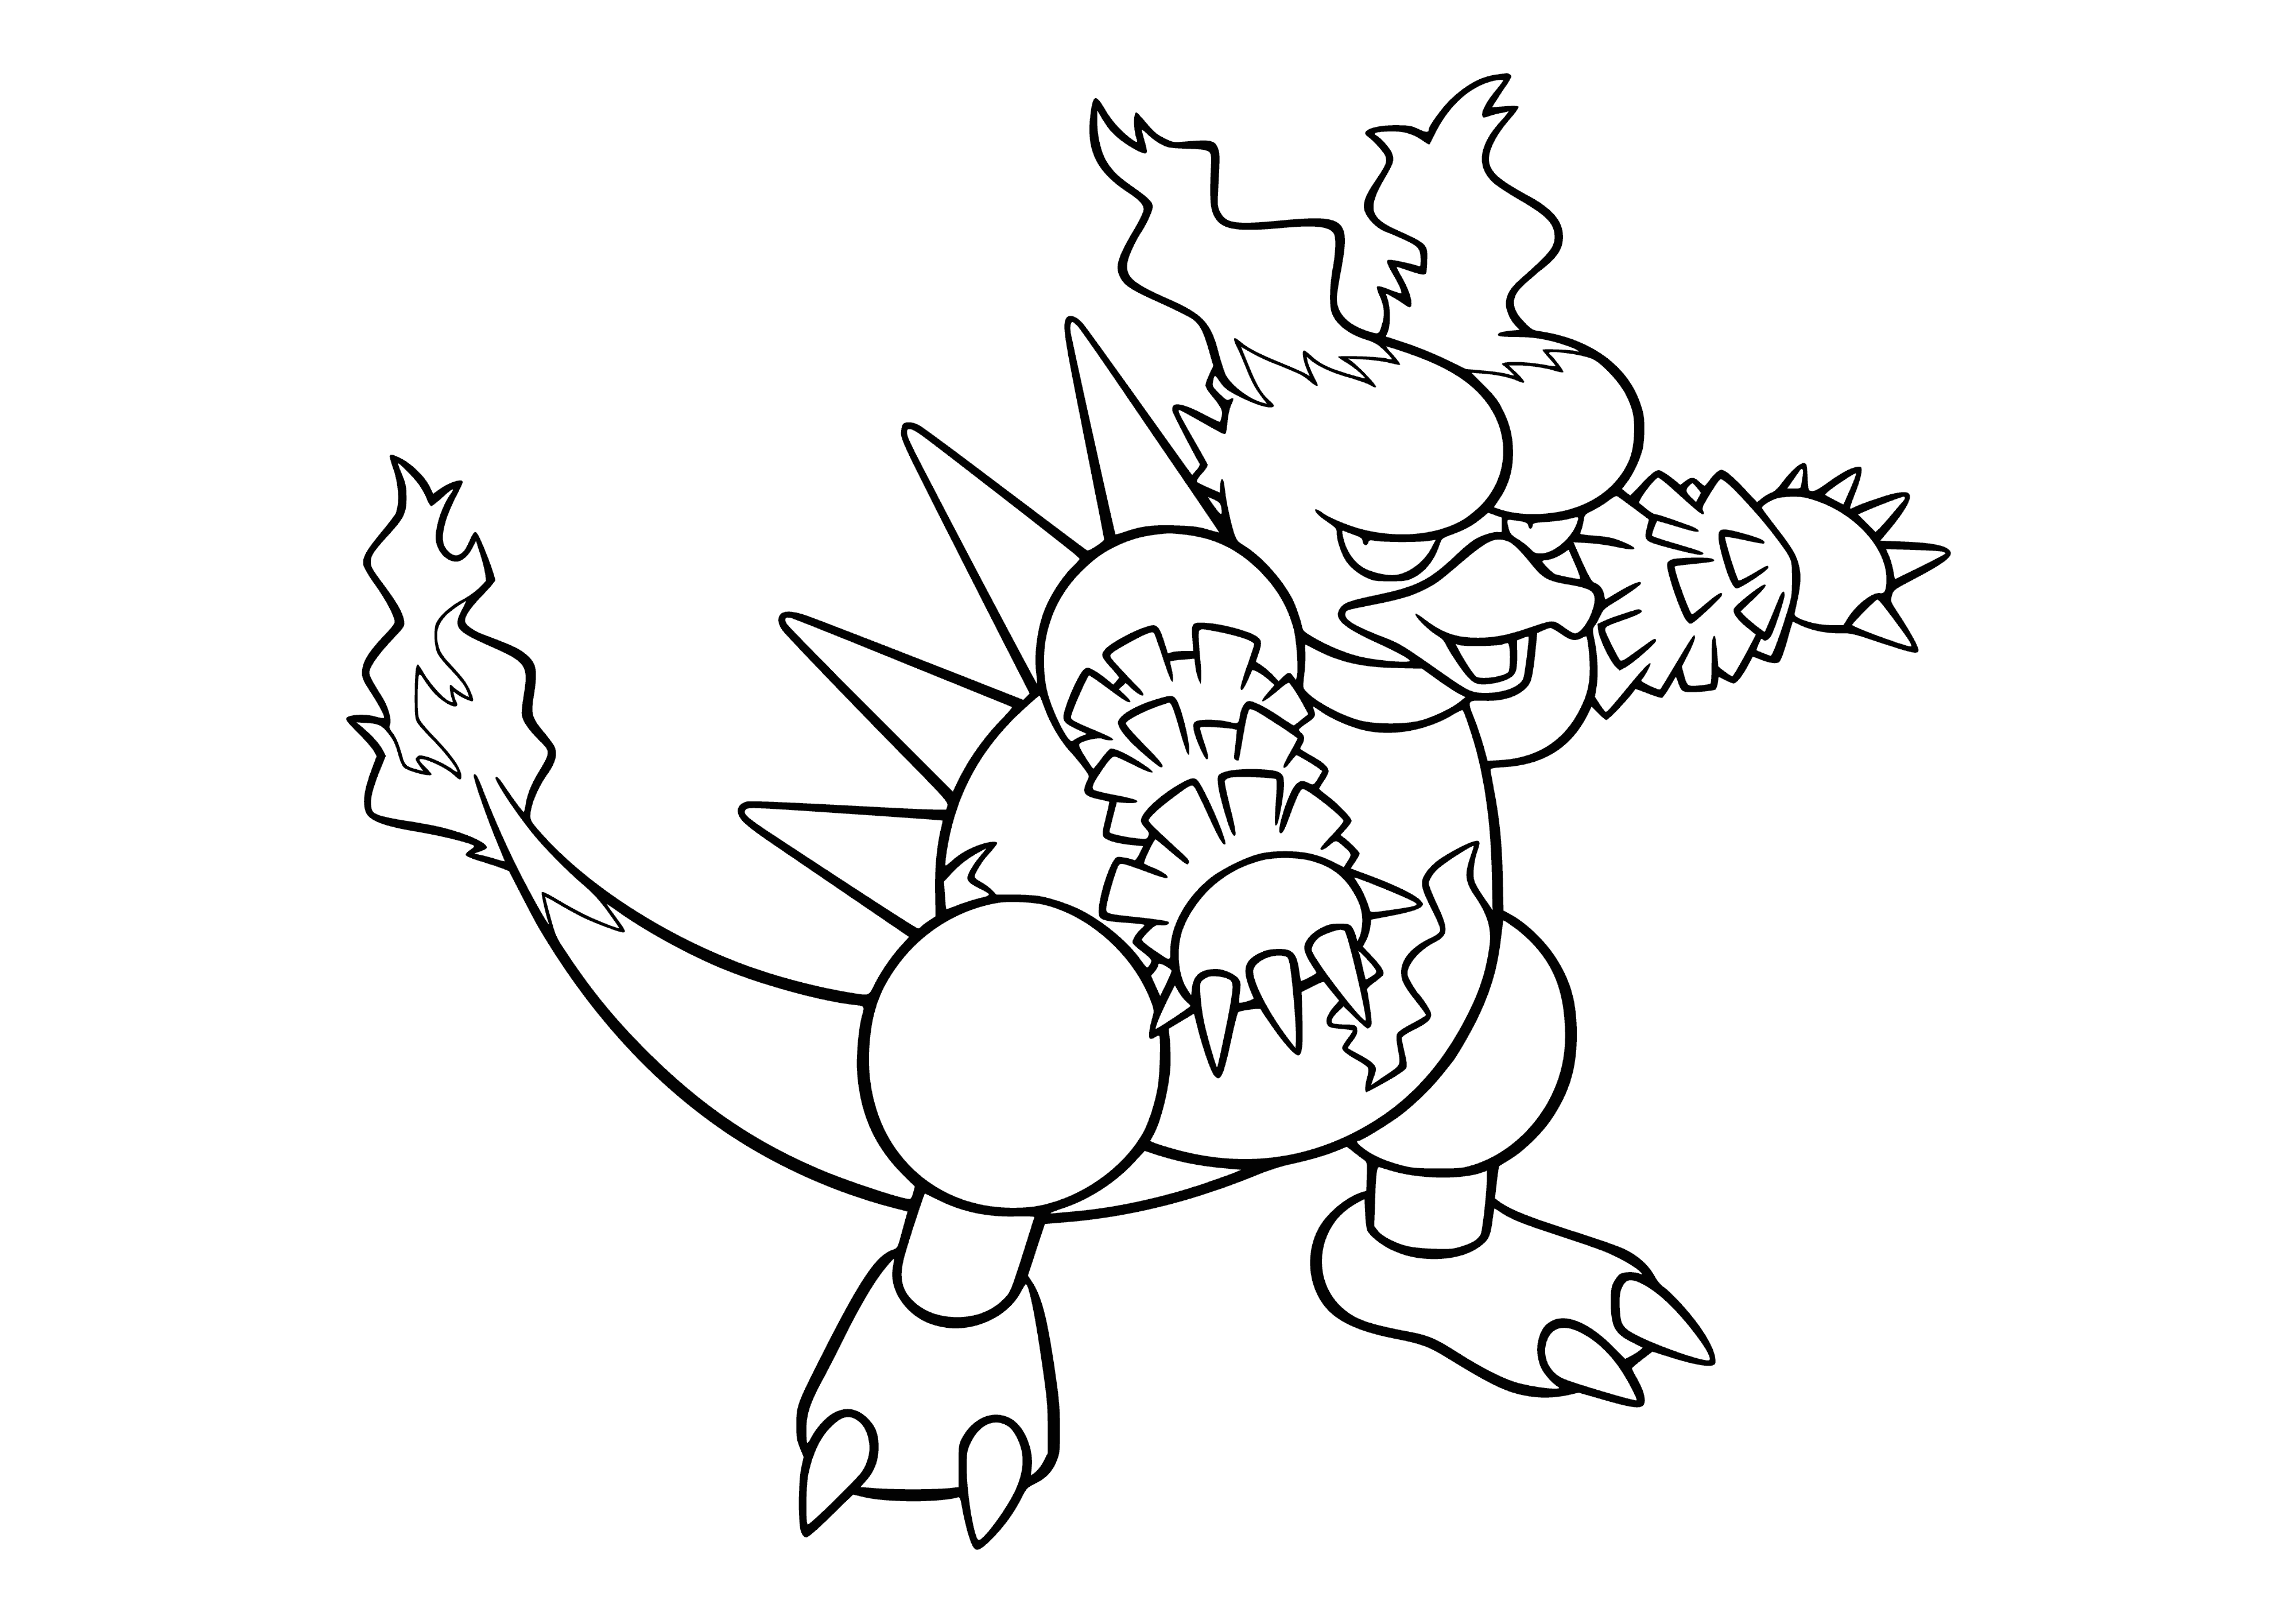 coloring page: PokÃ©mon formed from volcanic eruption is one of the strongest, able to survive extreme heat.